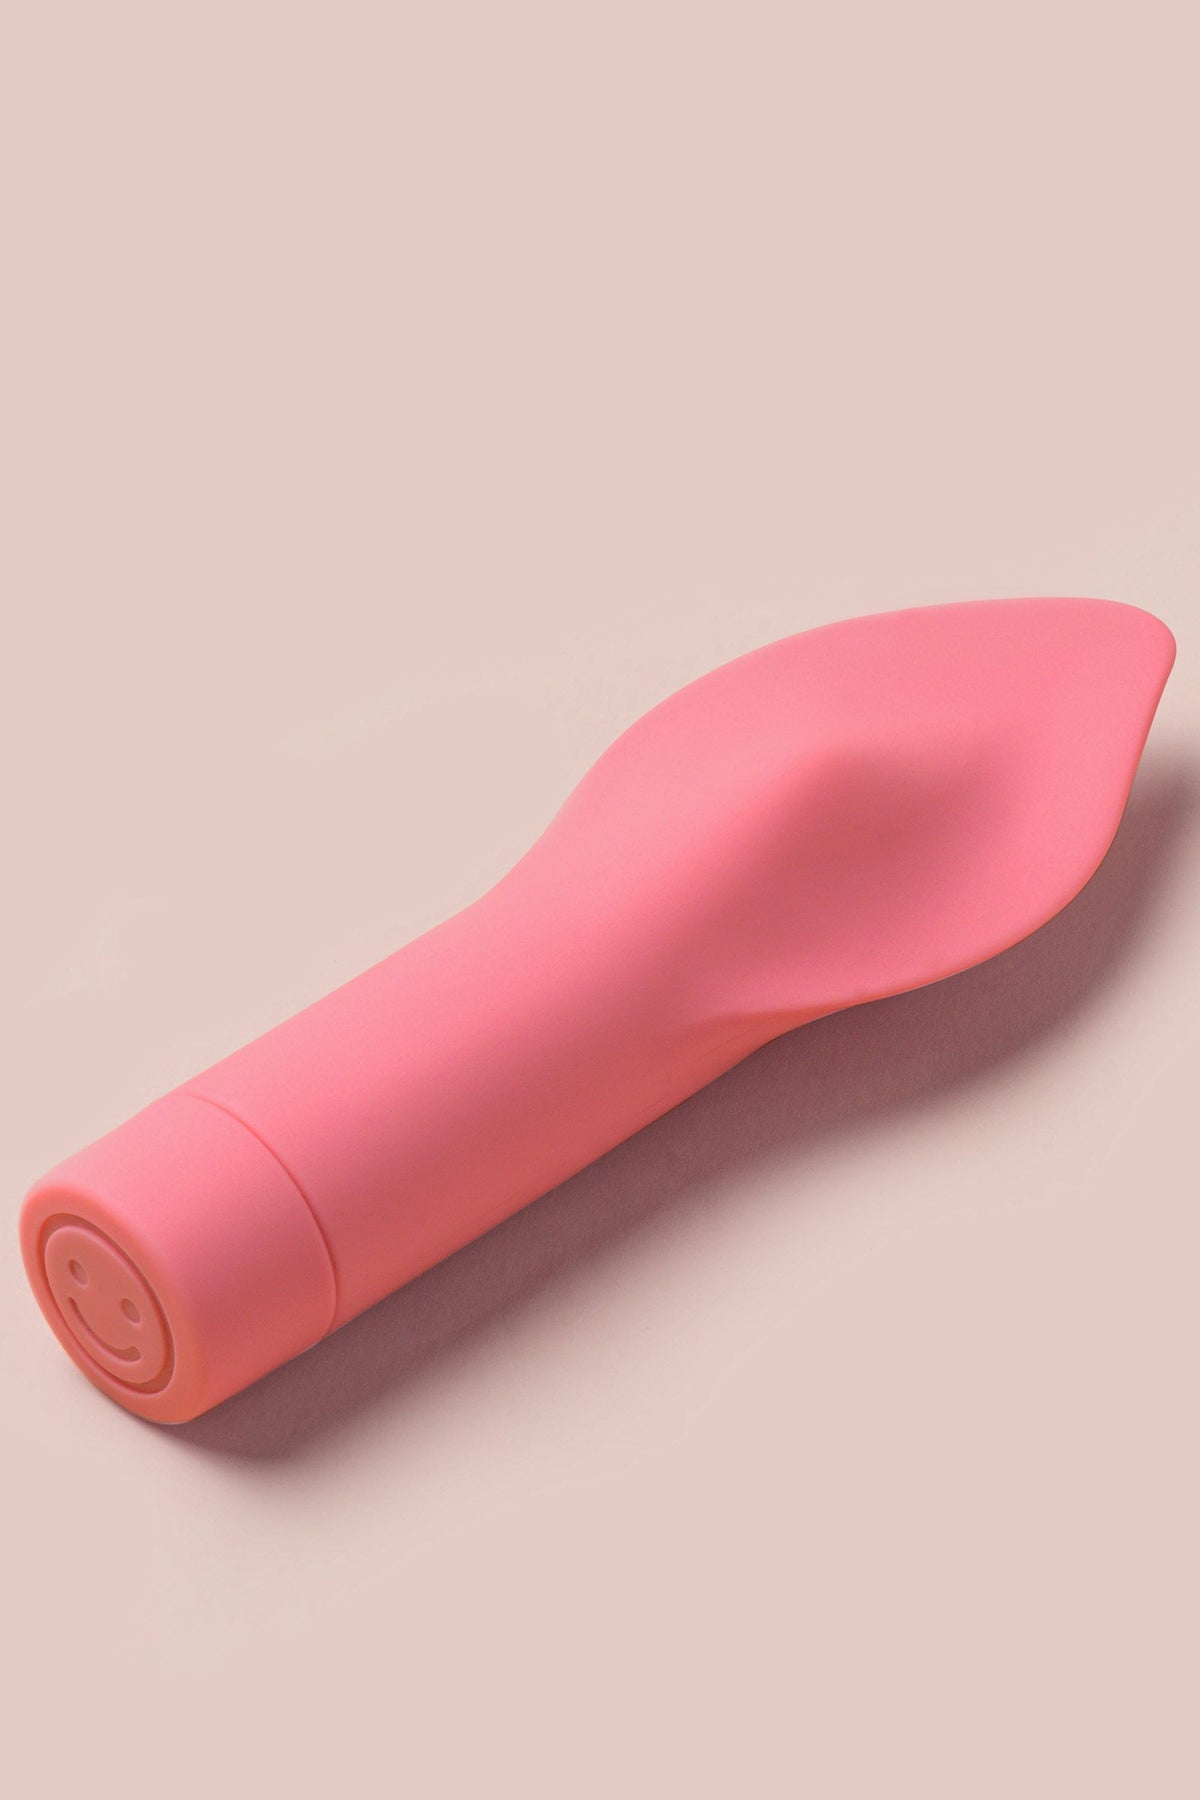 The Firefighter Intense Clitoral Vibrator